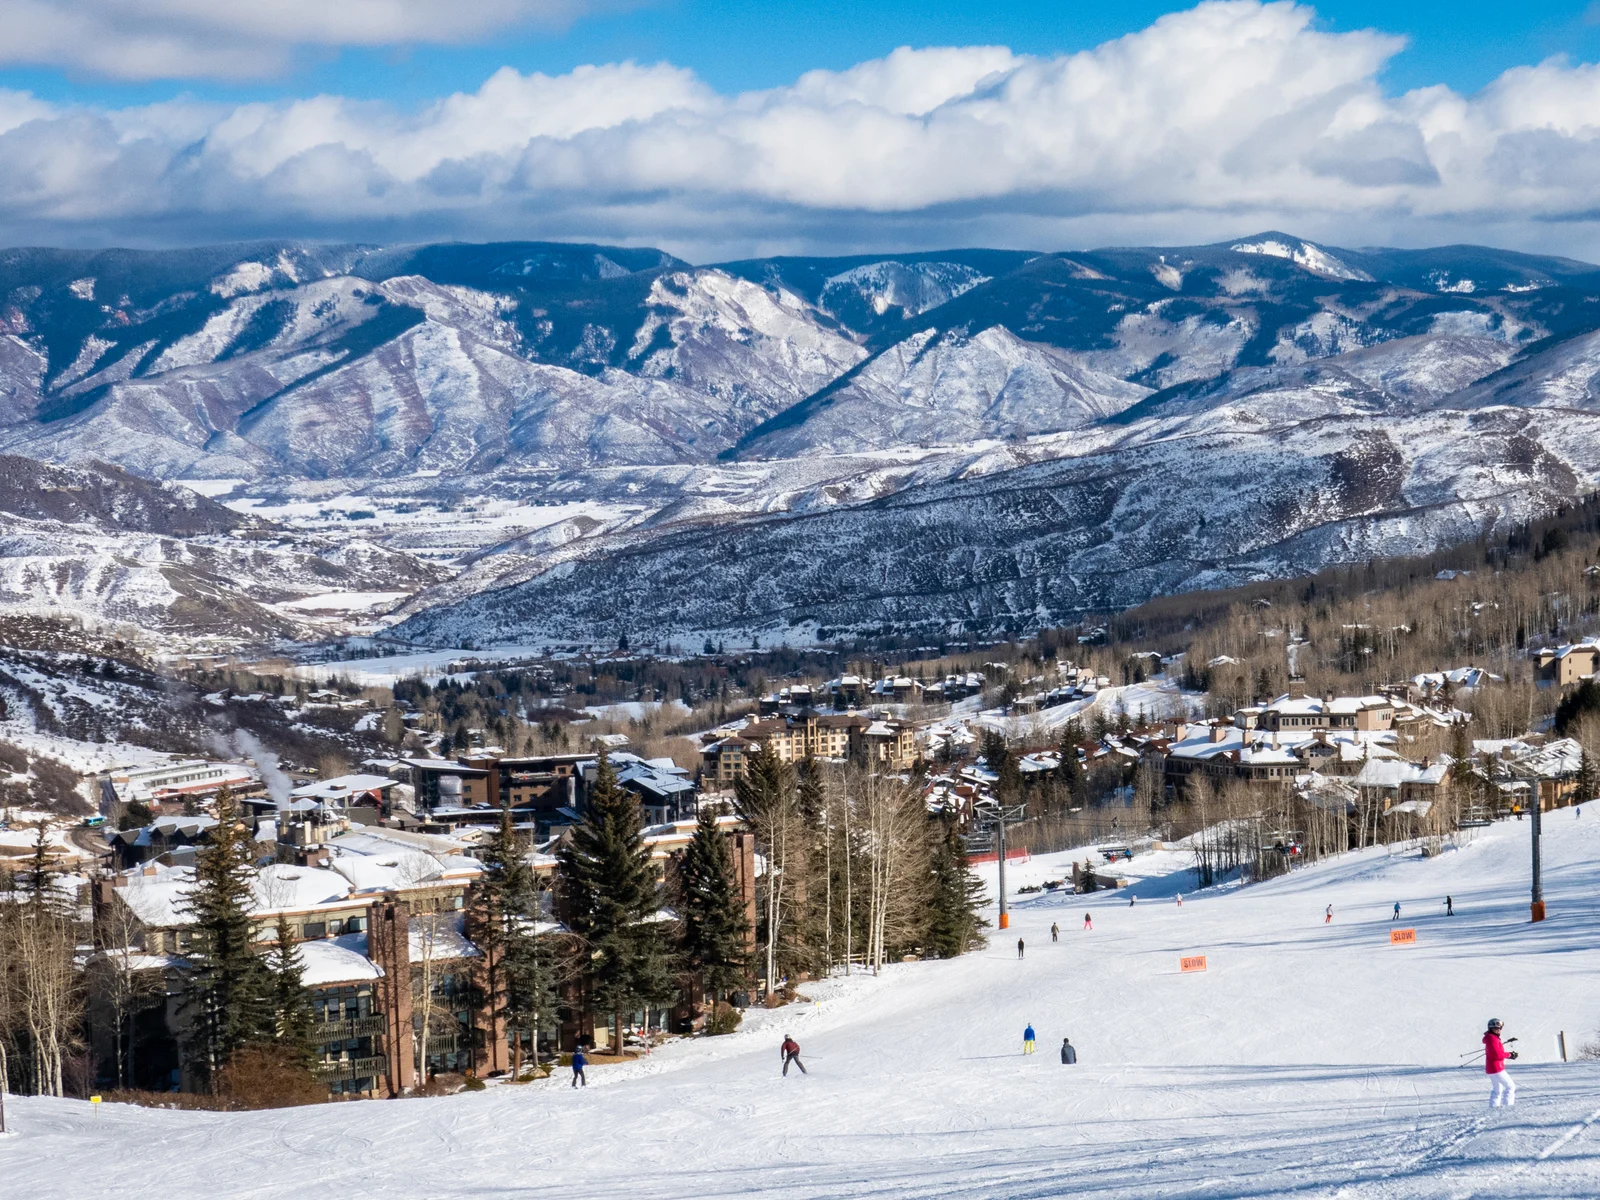 Pictured people skiing down a trail at Aspen Snowmass Ski Resort and the skyline of Rocky Mountains, a piece on one of the best ski resorts near Denver